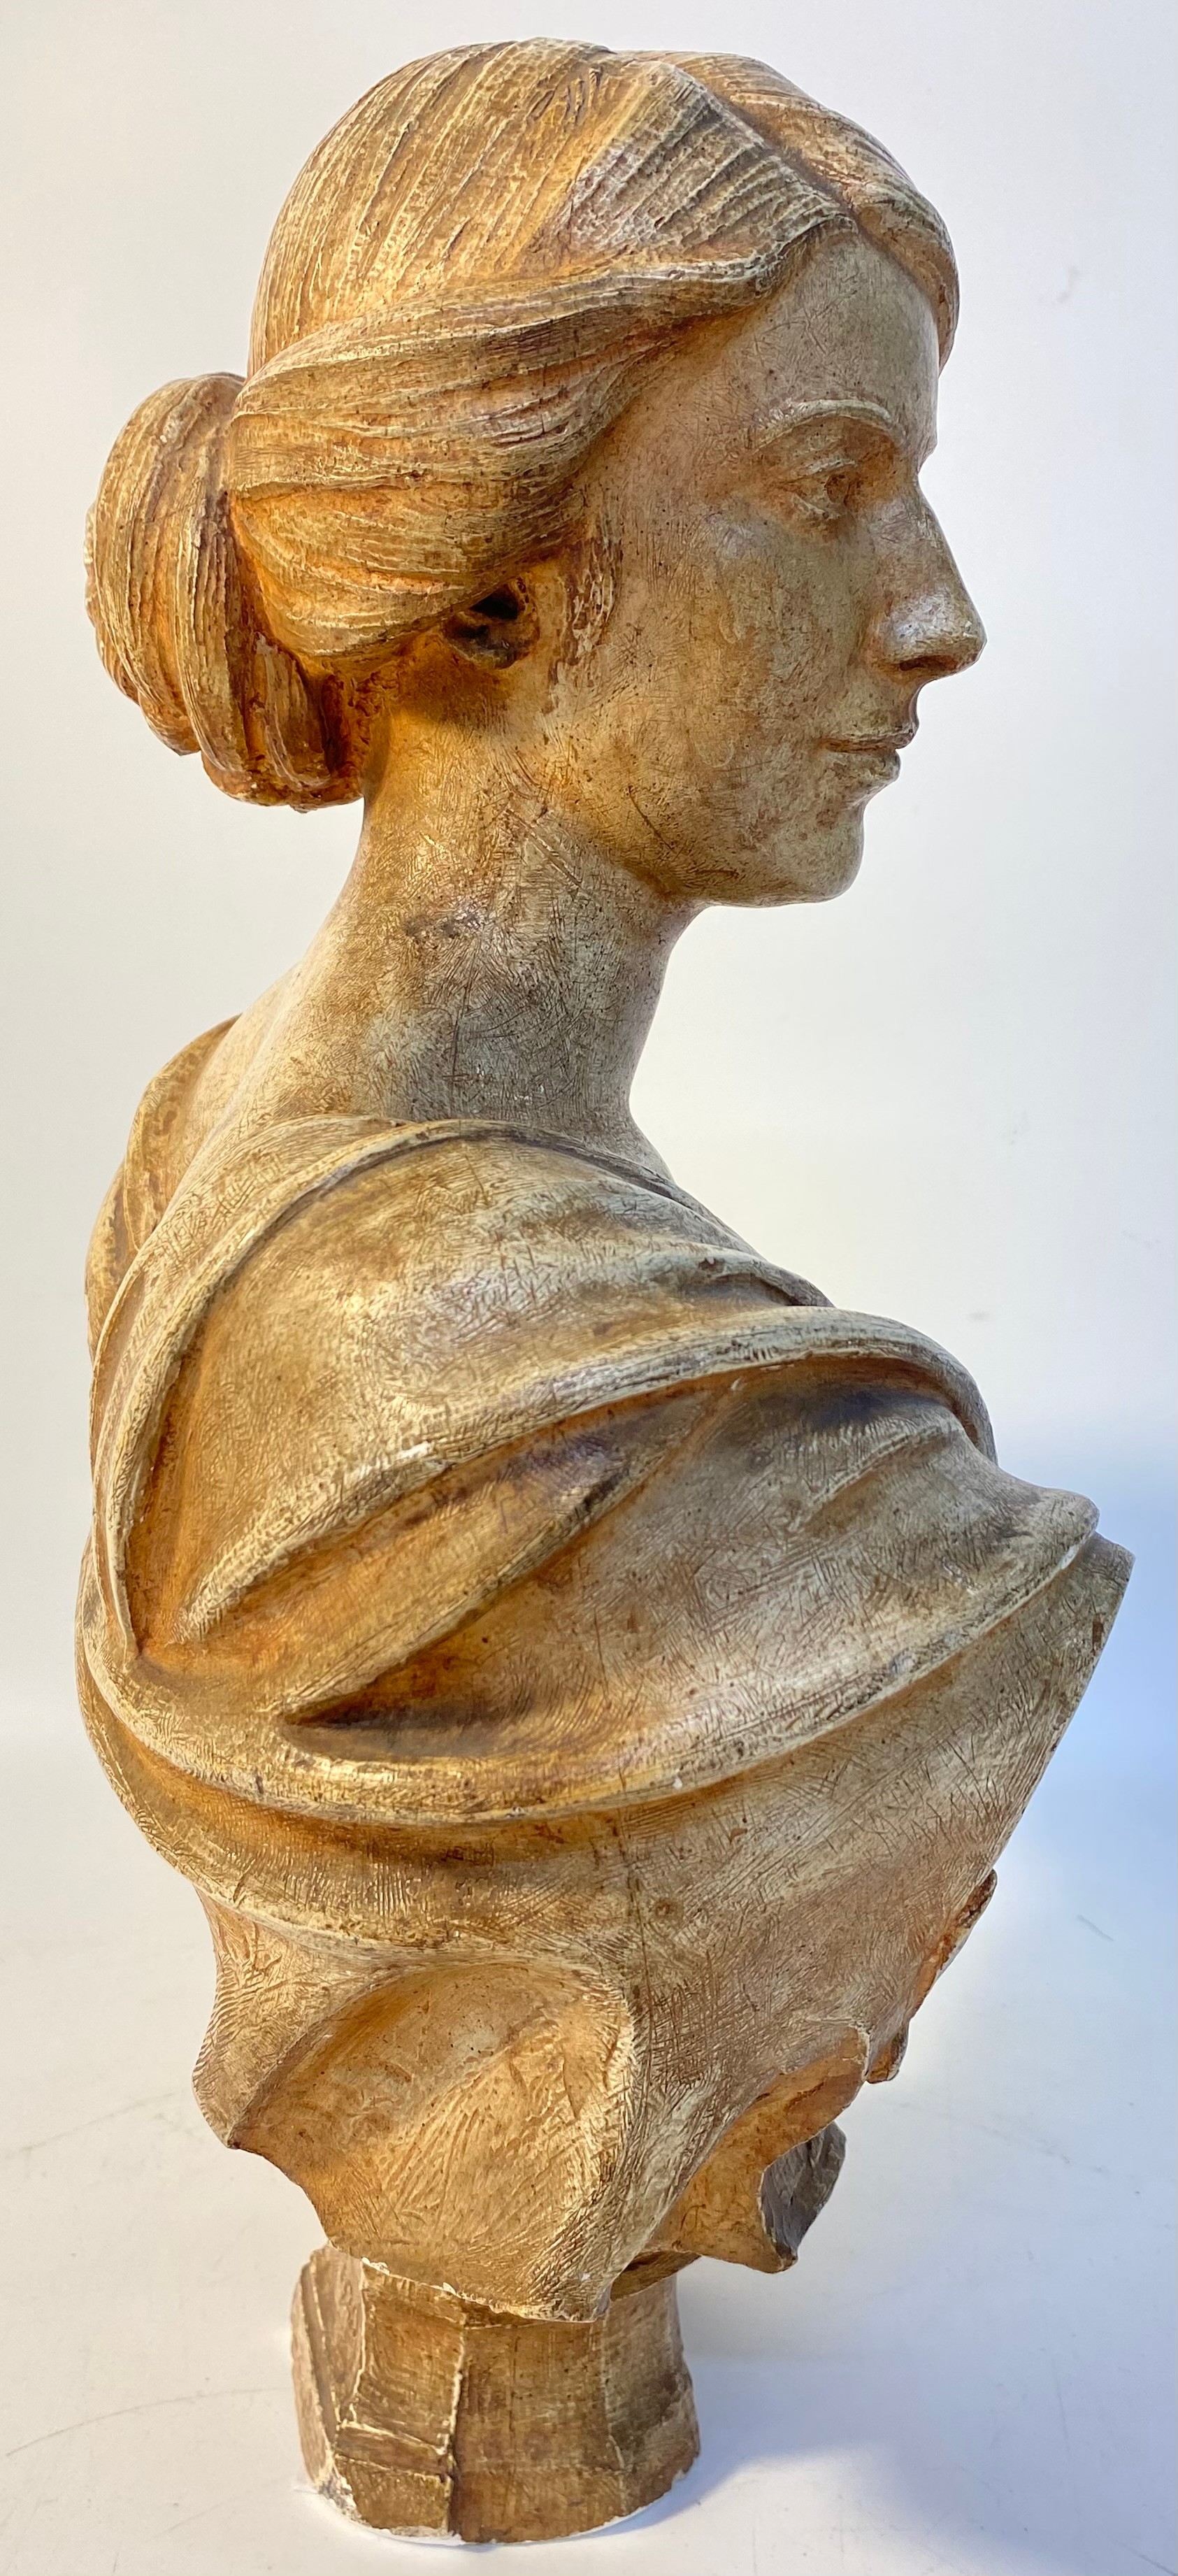 1900s lady bust by Macgillivray dated 1920 [29x40cm] - Image 3 of 6